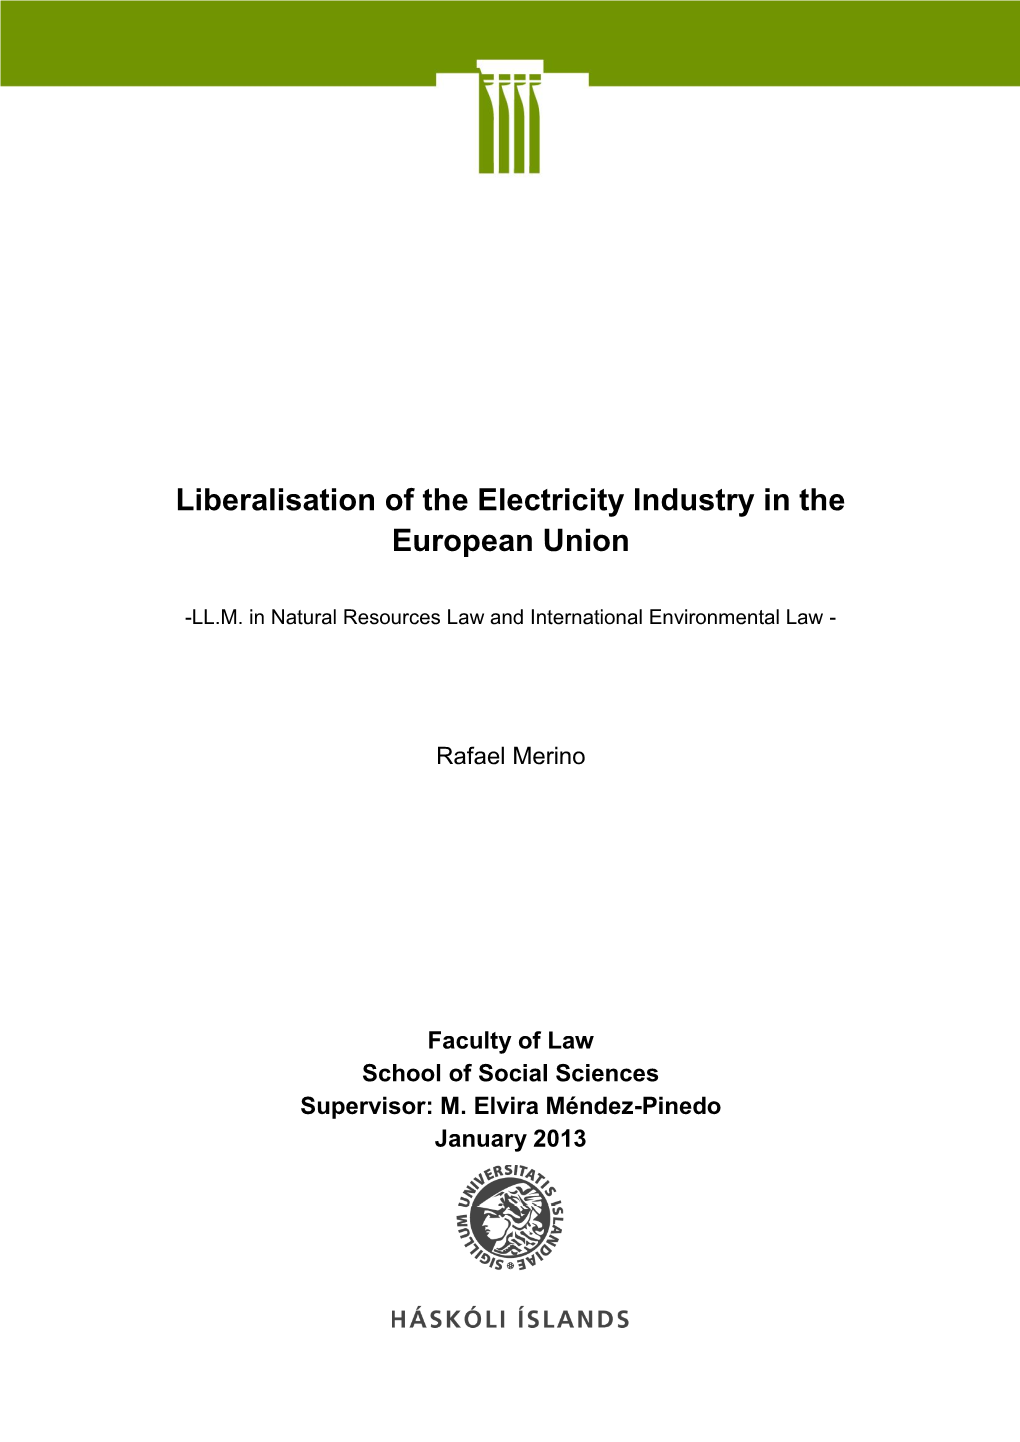 Liberalisation of the Electricity Industry in the European Union